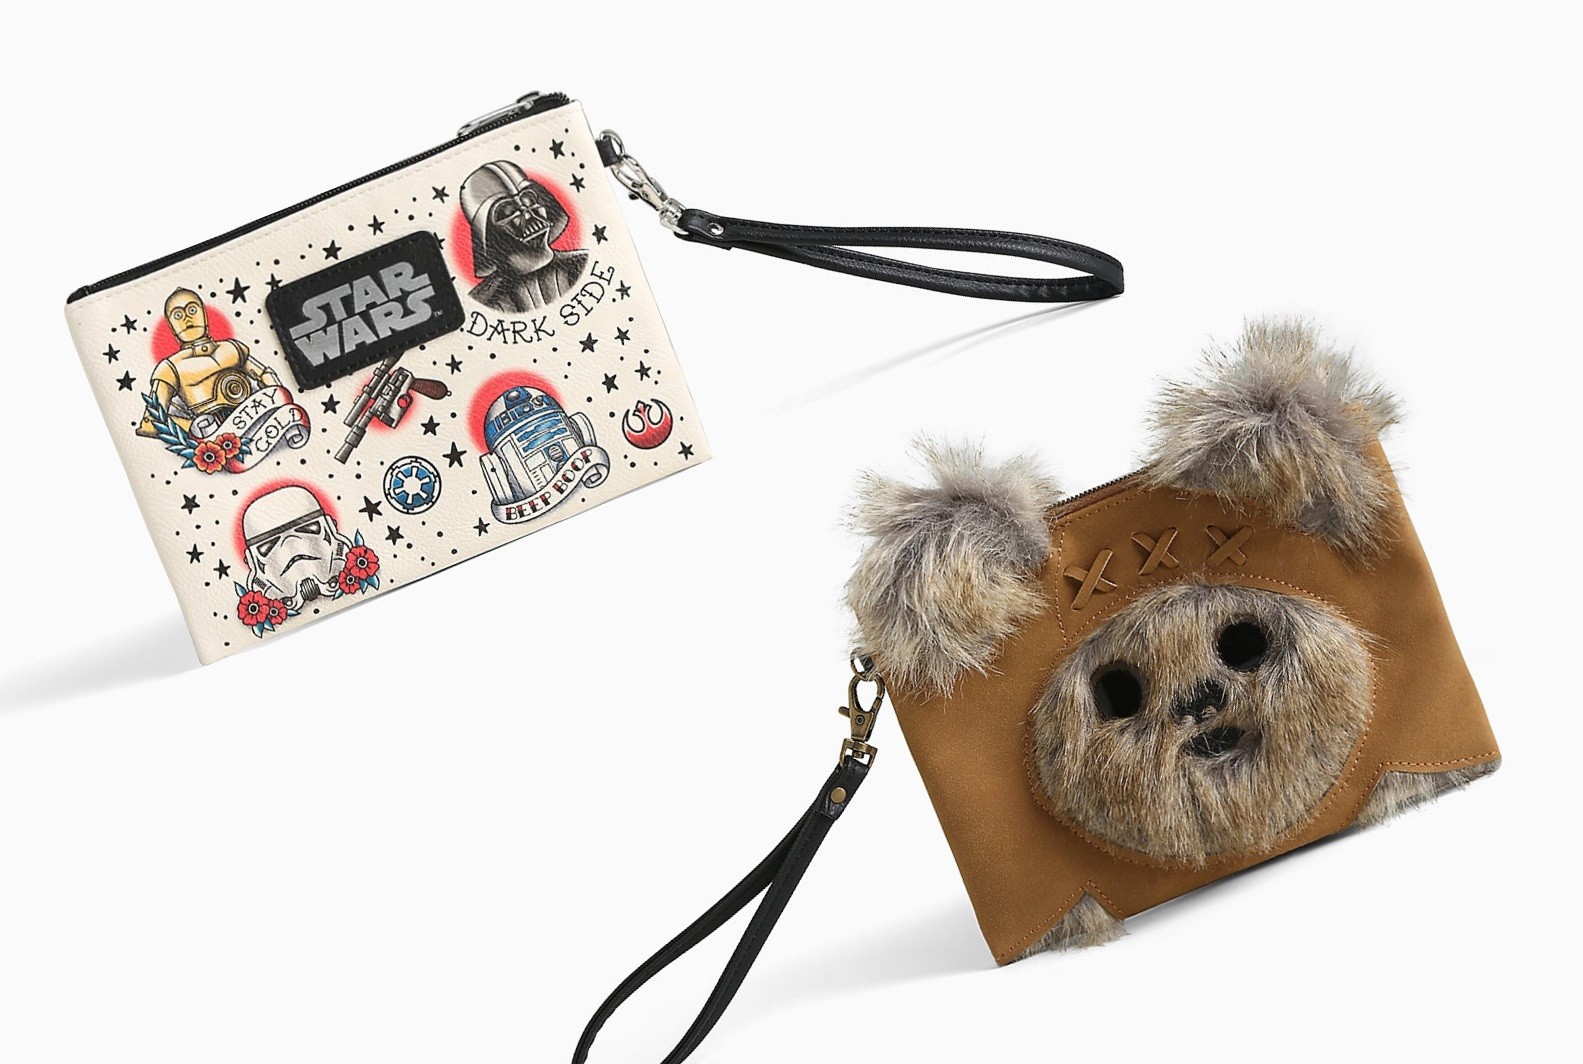 New Loungefly Star Wars clutches